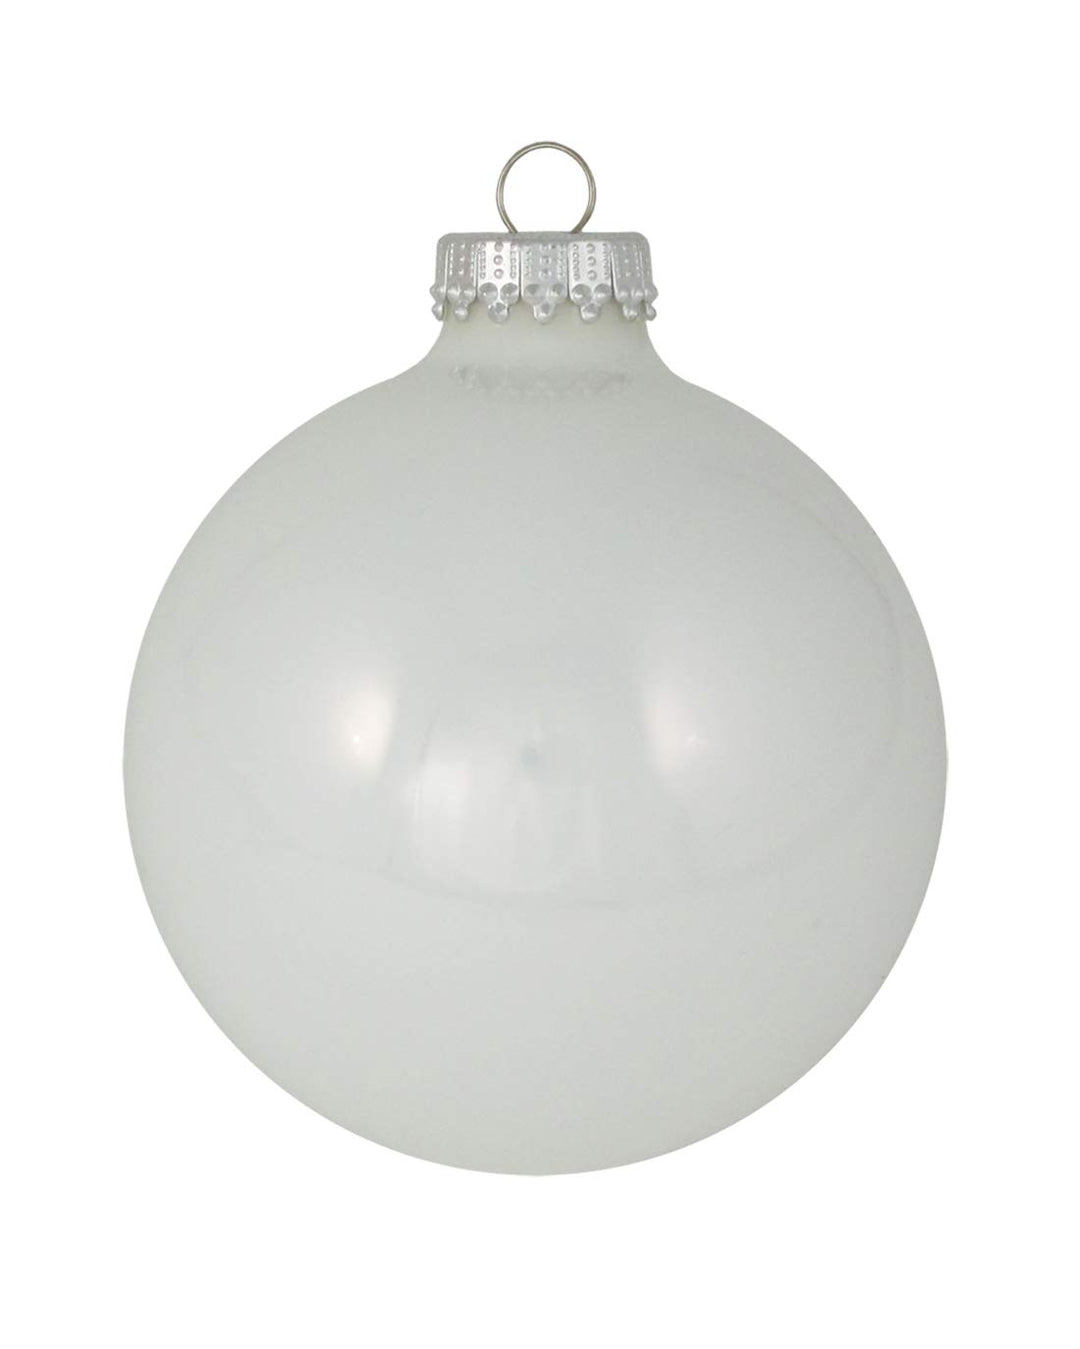 Glass Christmas Tree Ornaments - 80mm / 3.25" [4 Pieces] Designer Balls from Christmas By Krebs Seamless Hanging Holiday Decor (Porcelain White)